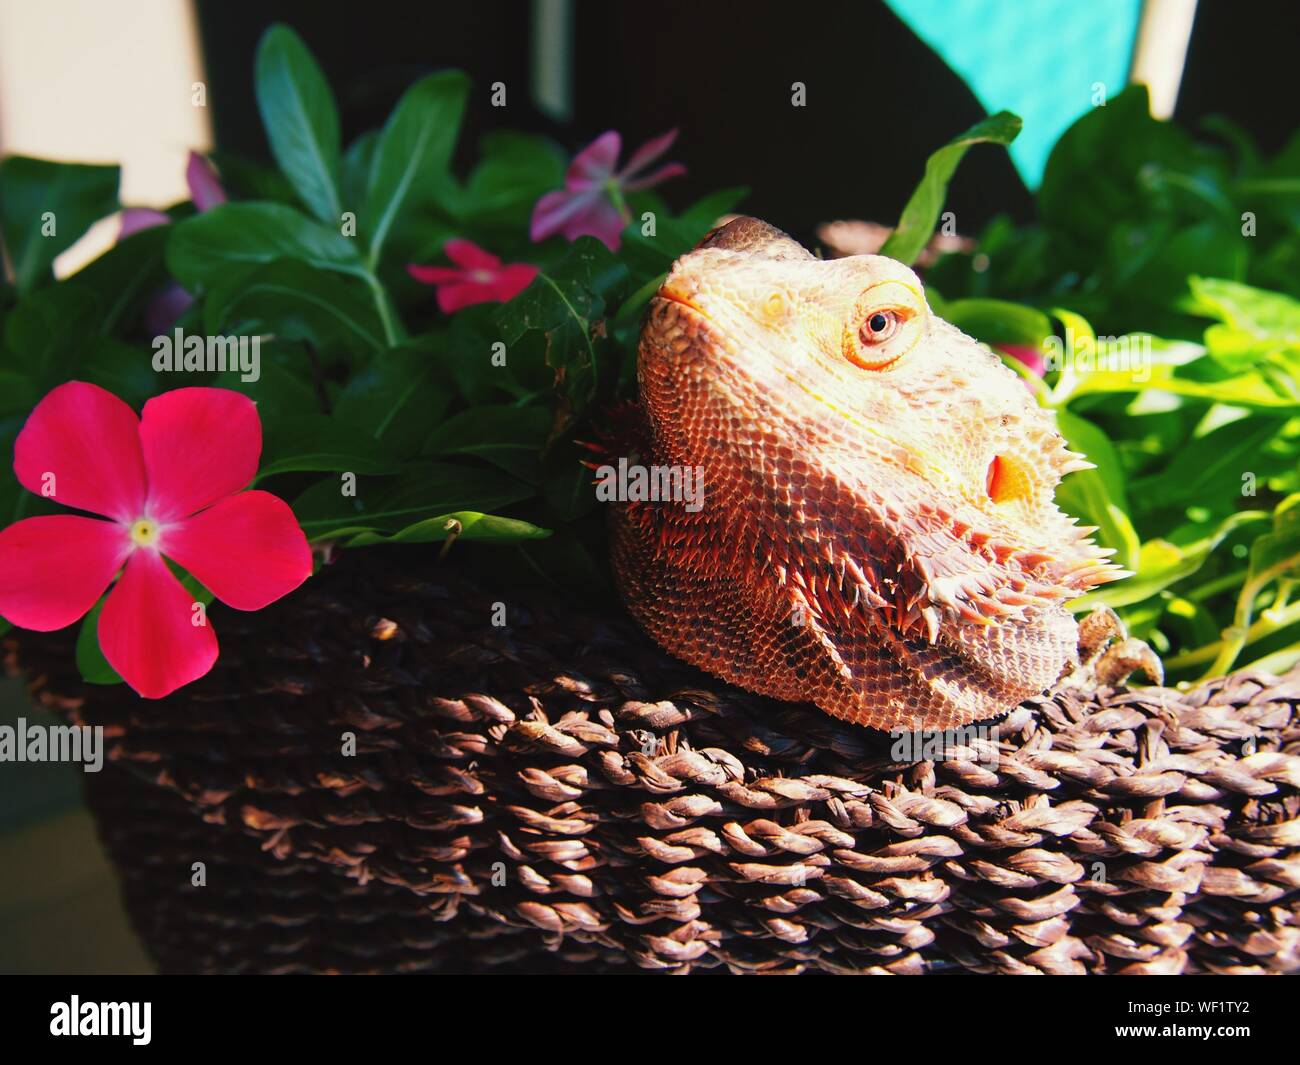 Close-up Of Lizard In Basket With Plant Stock Photo